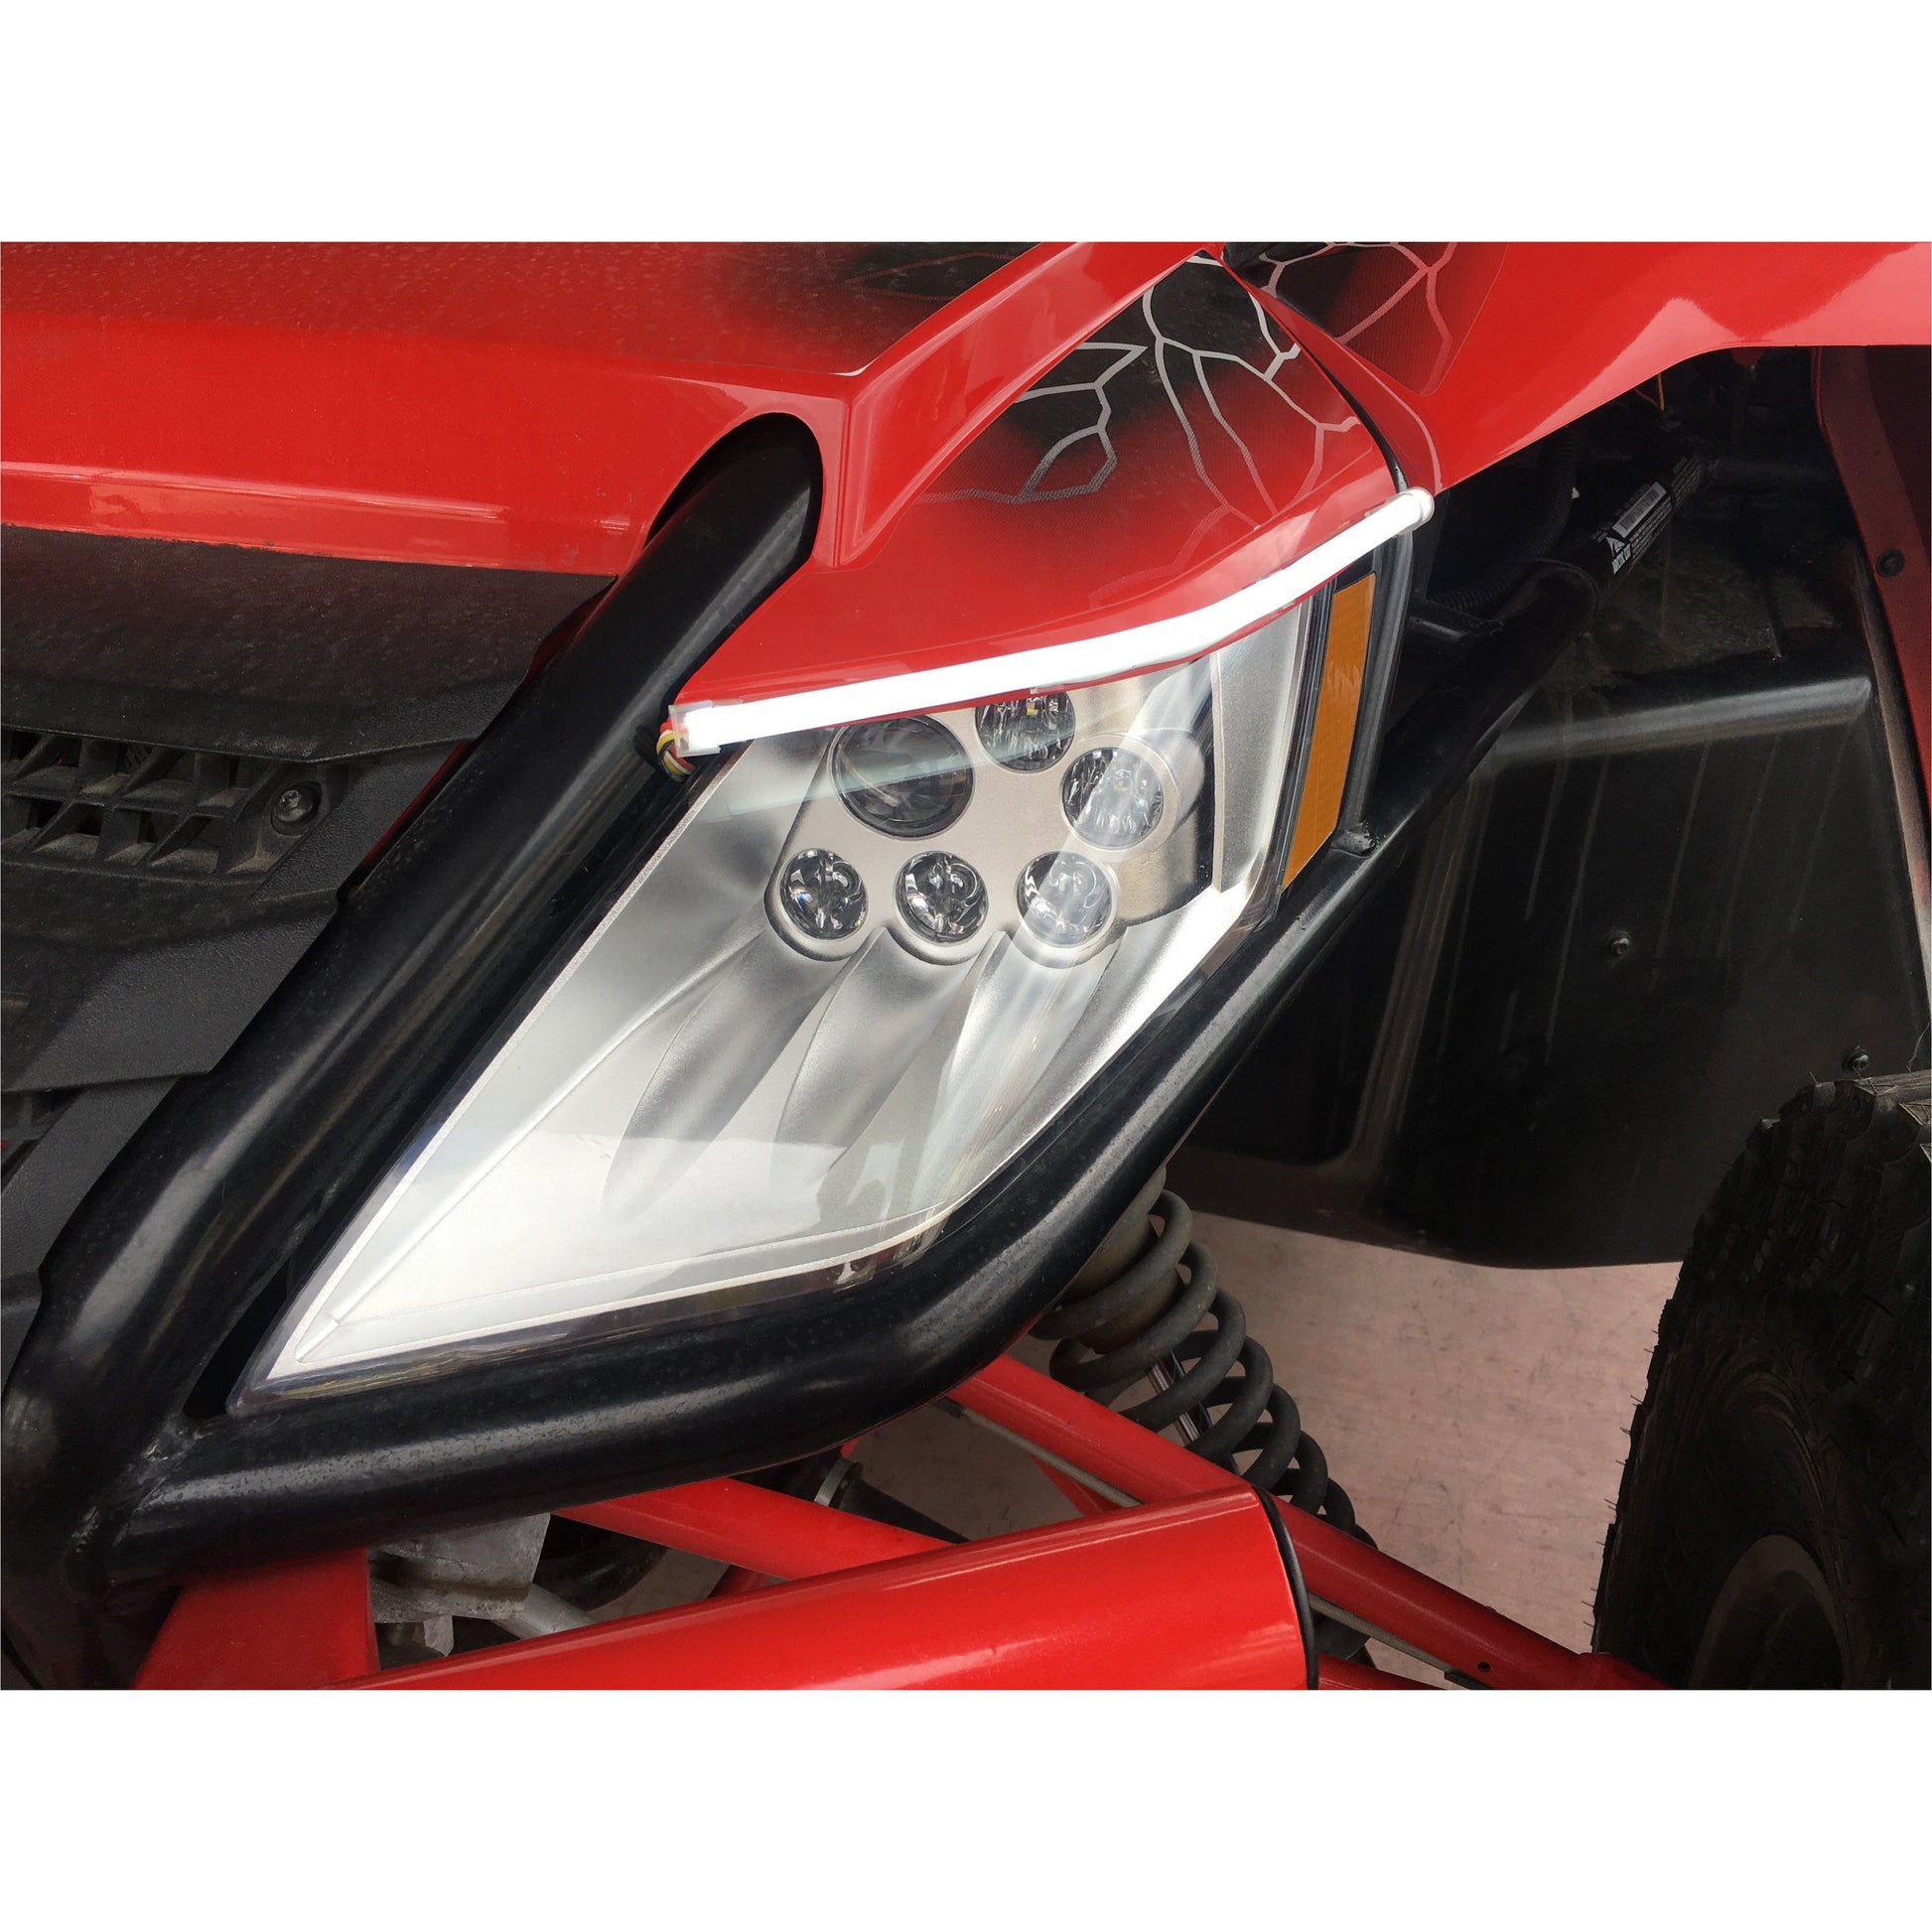 Wildcat 1000 Integrated Street Legal Kit with Sequential Switchback (DRL) Front Turn Signals